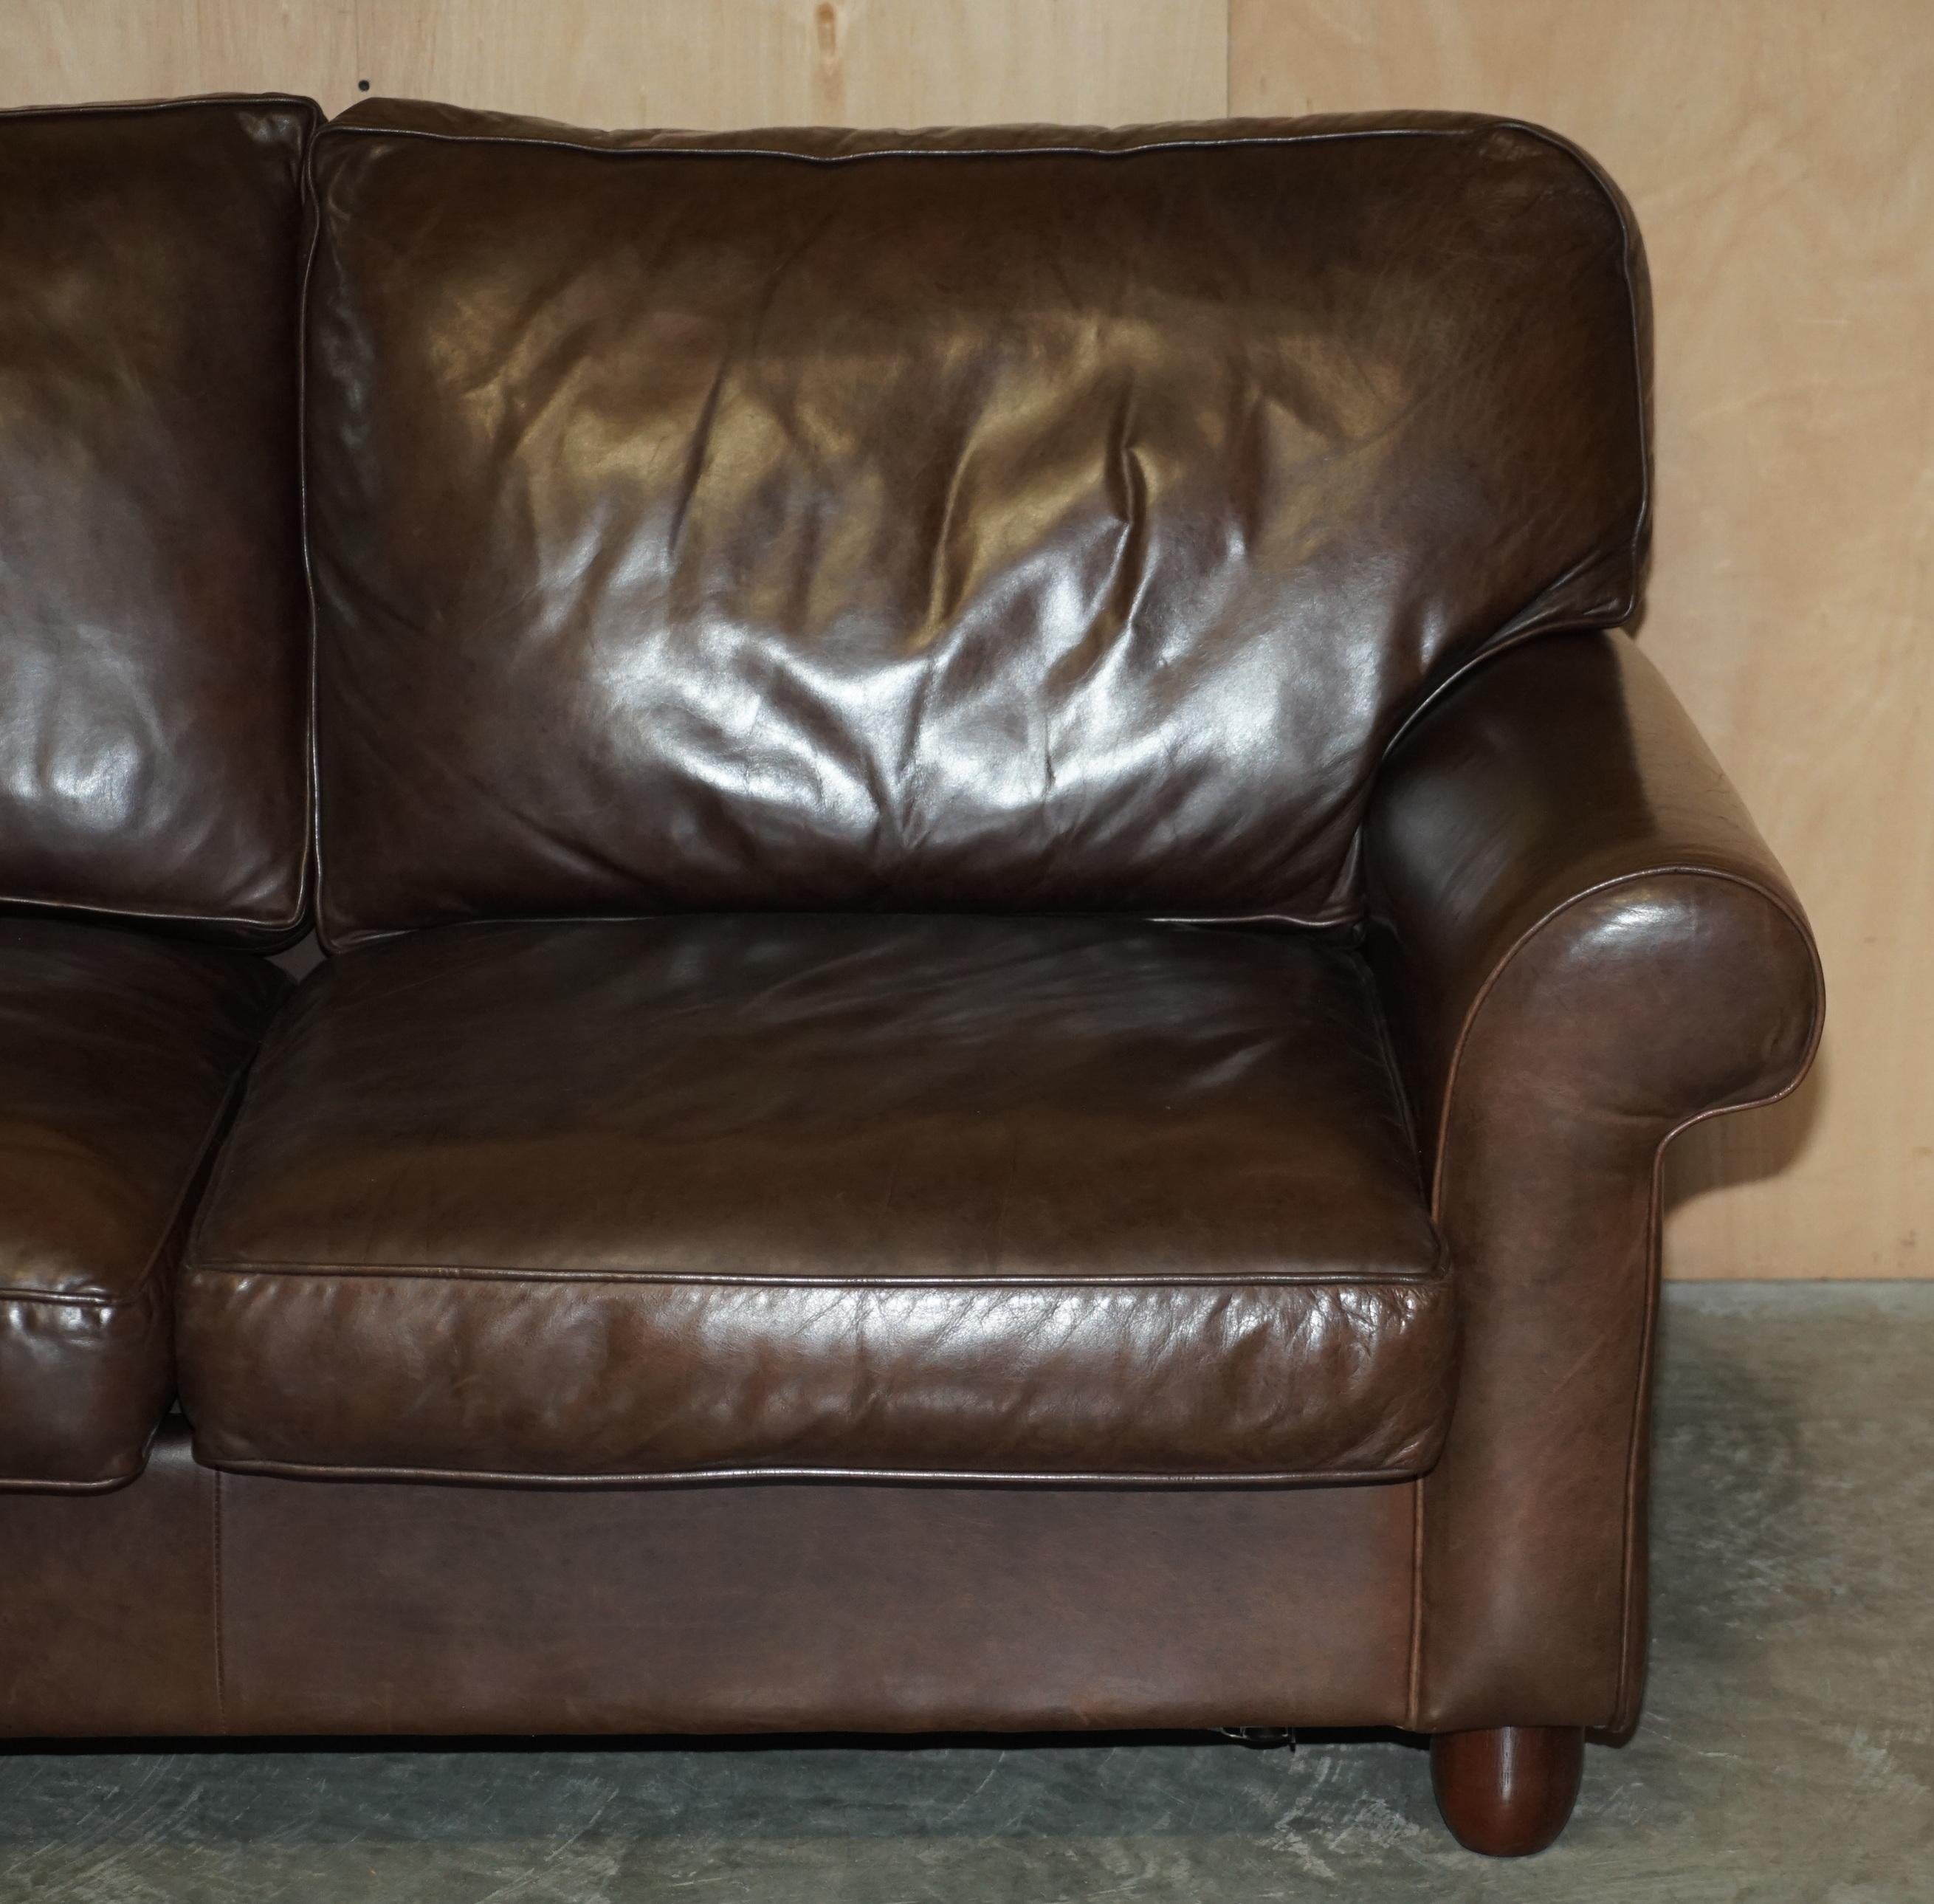 laura ashley leather sofas for sale